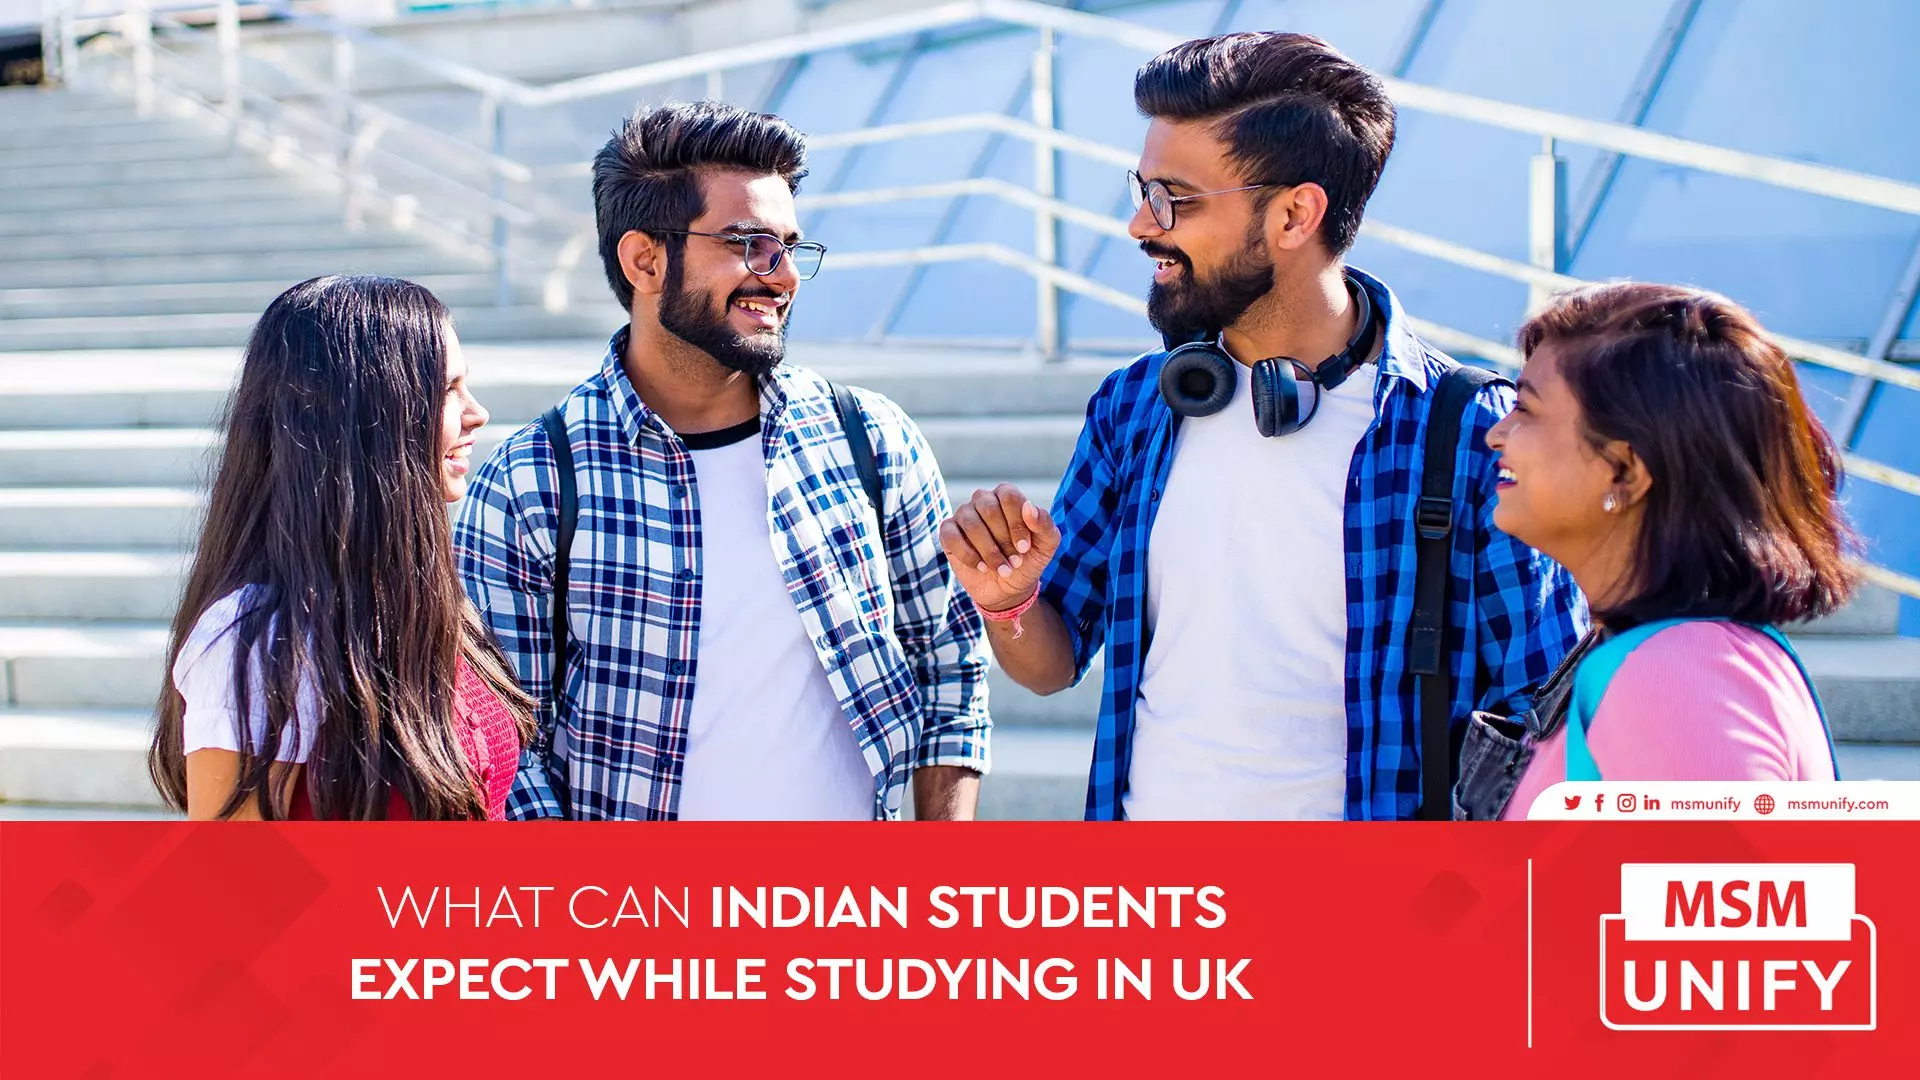 011823 MSM Unify What can Indian Students Expect While Studying in UK 1920x1080